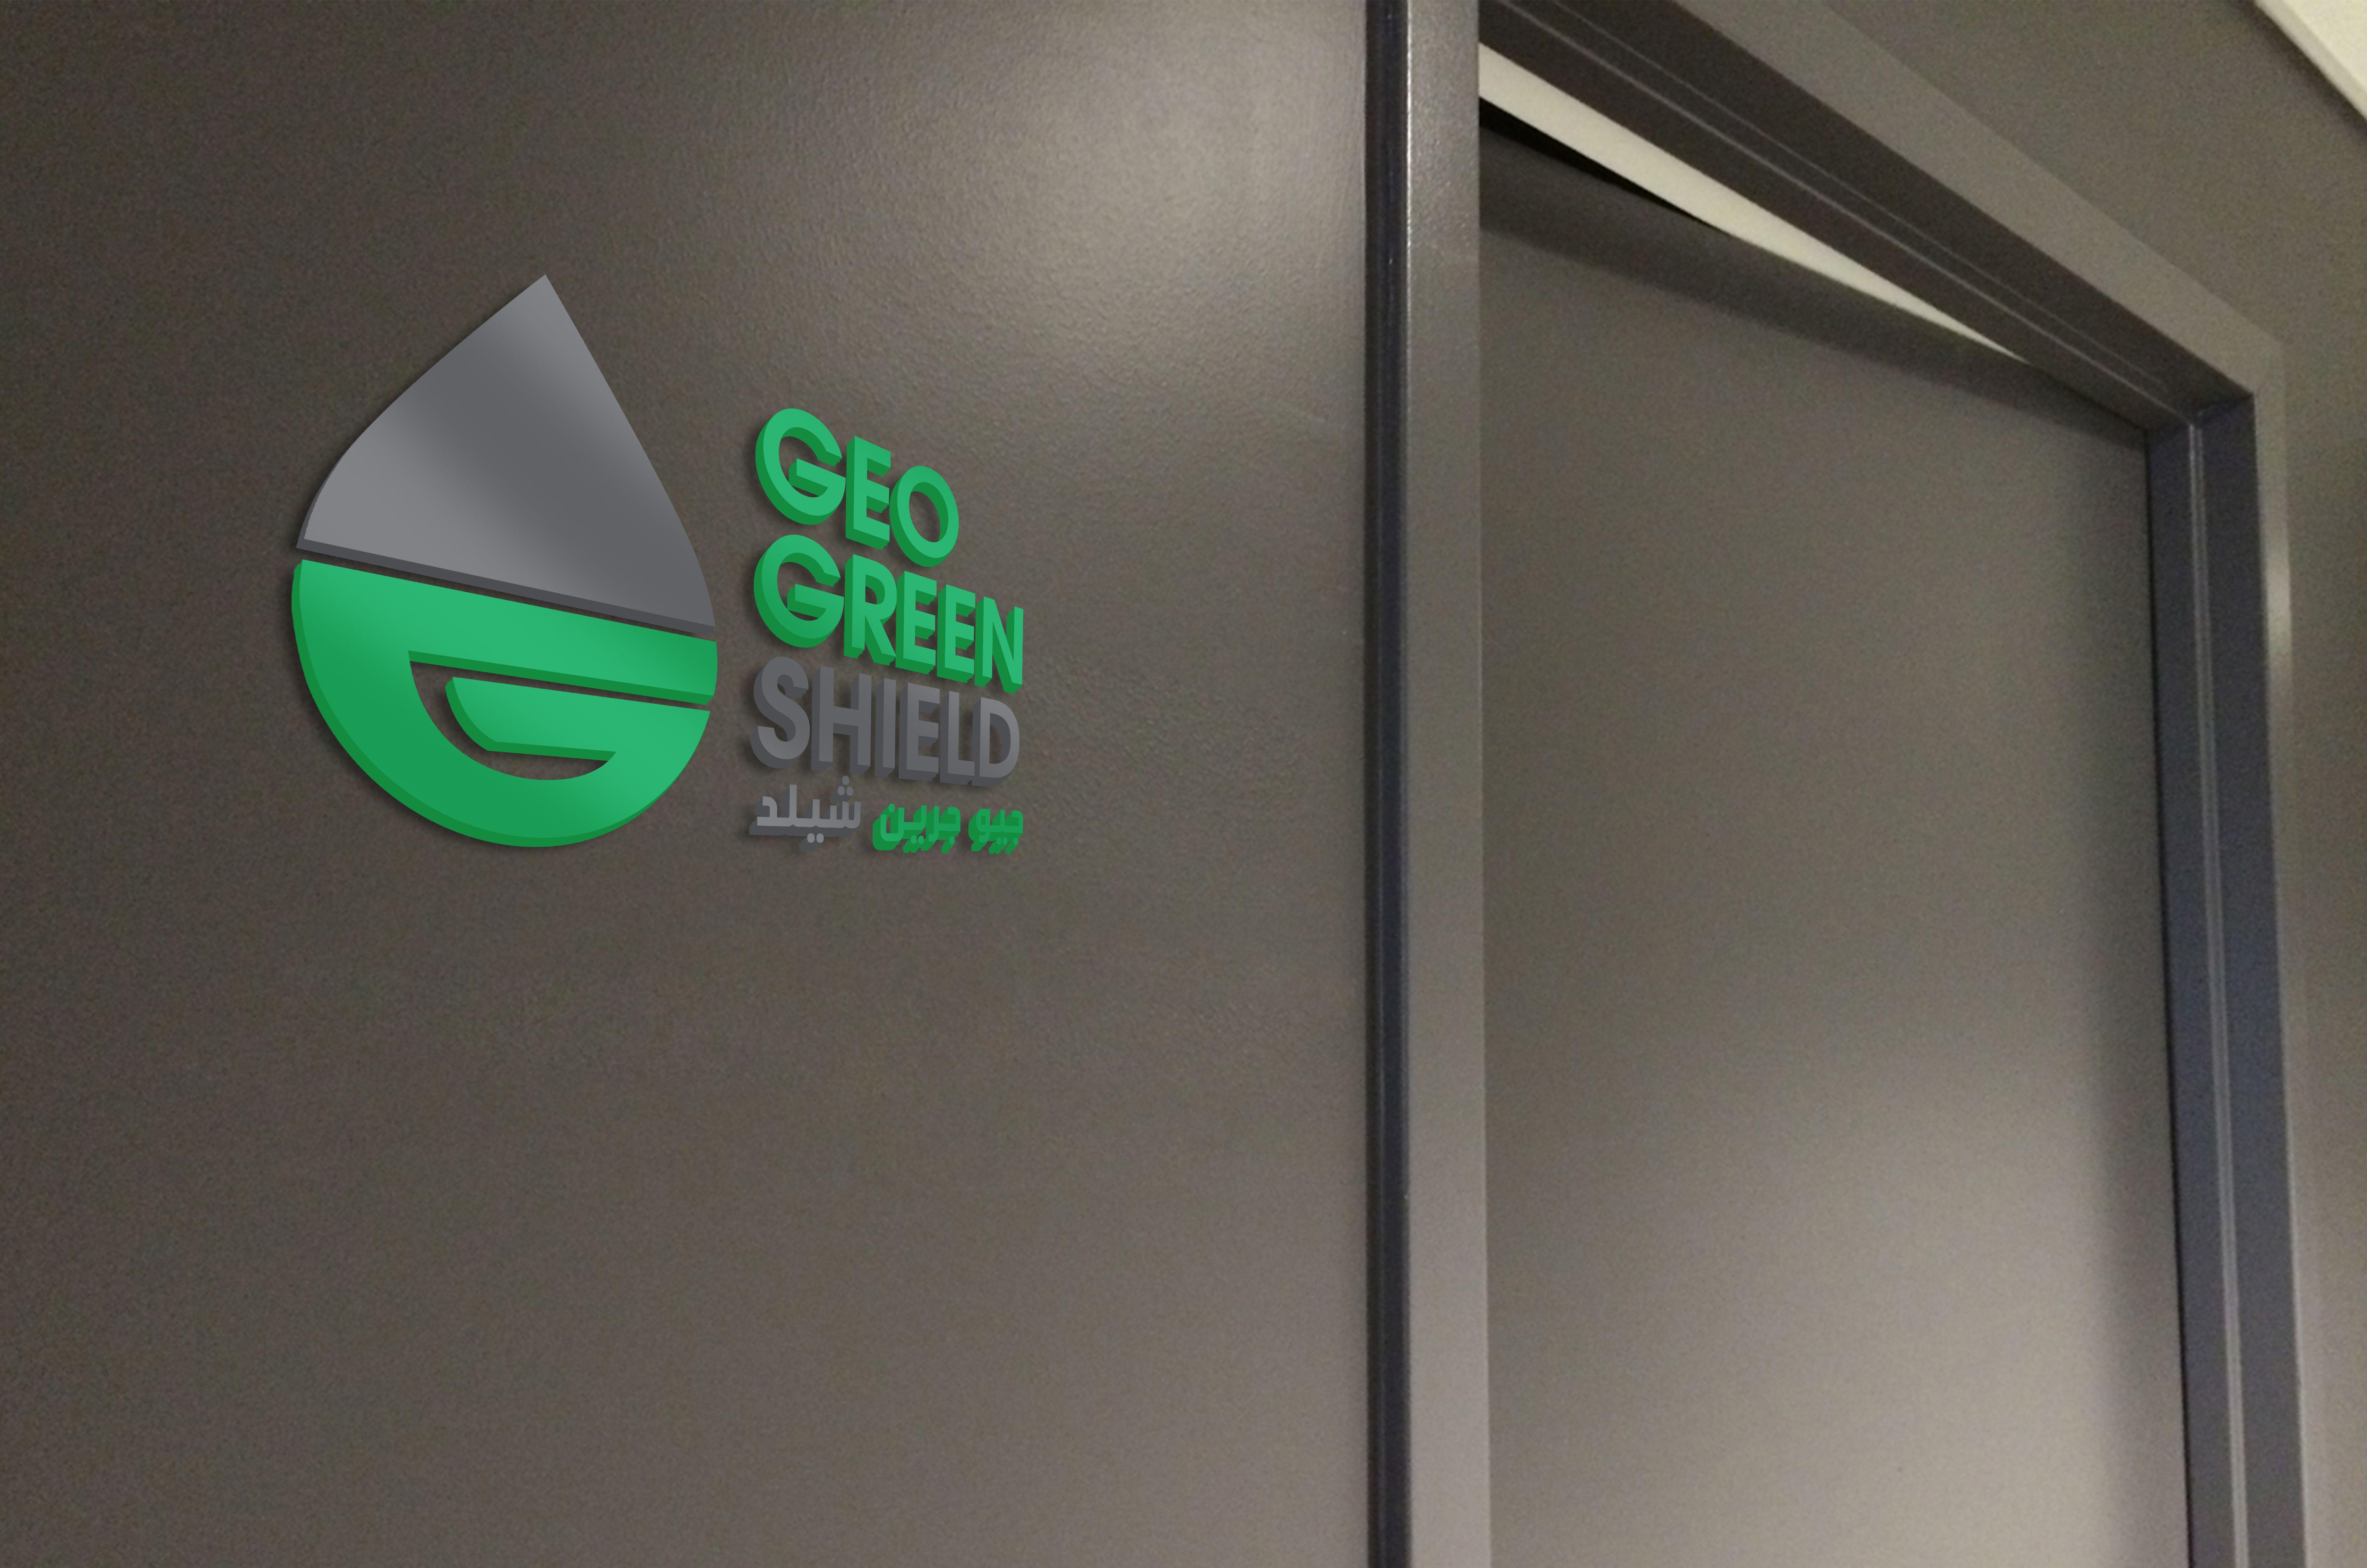 Green Shield with Company Logo - Our new work, Client: GEO GREEN SHIELD Company branding | Logo ...